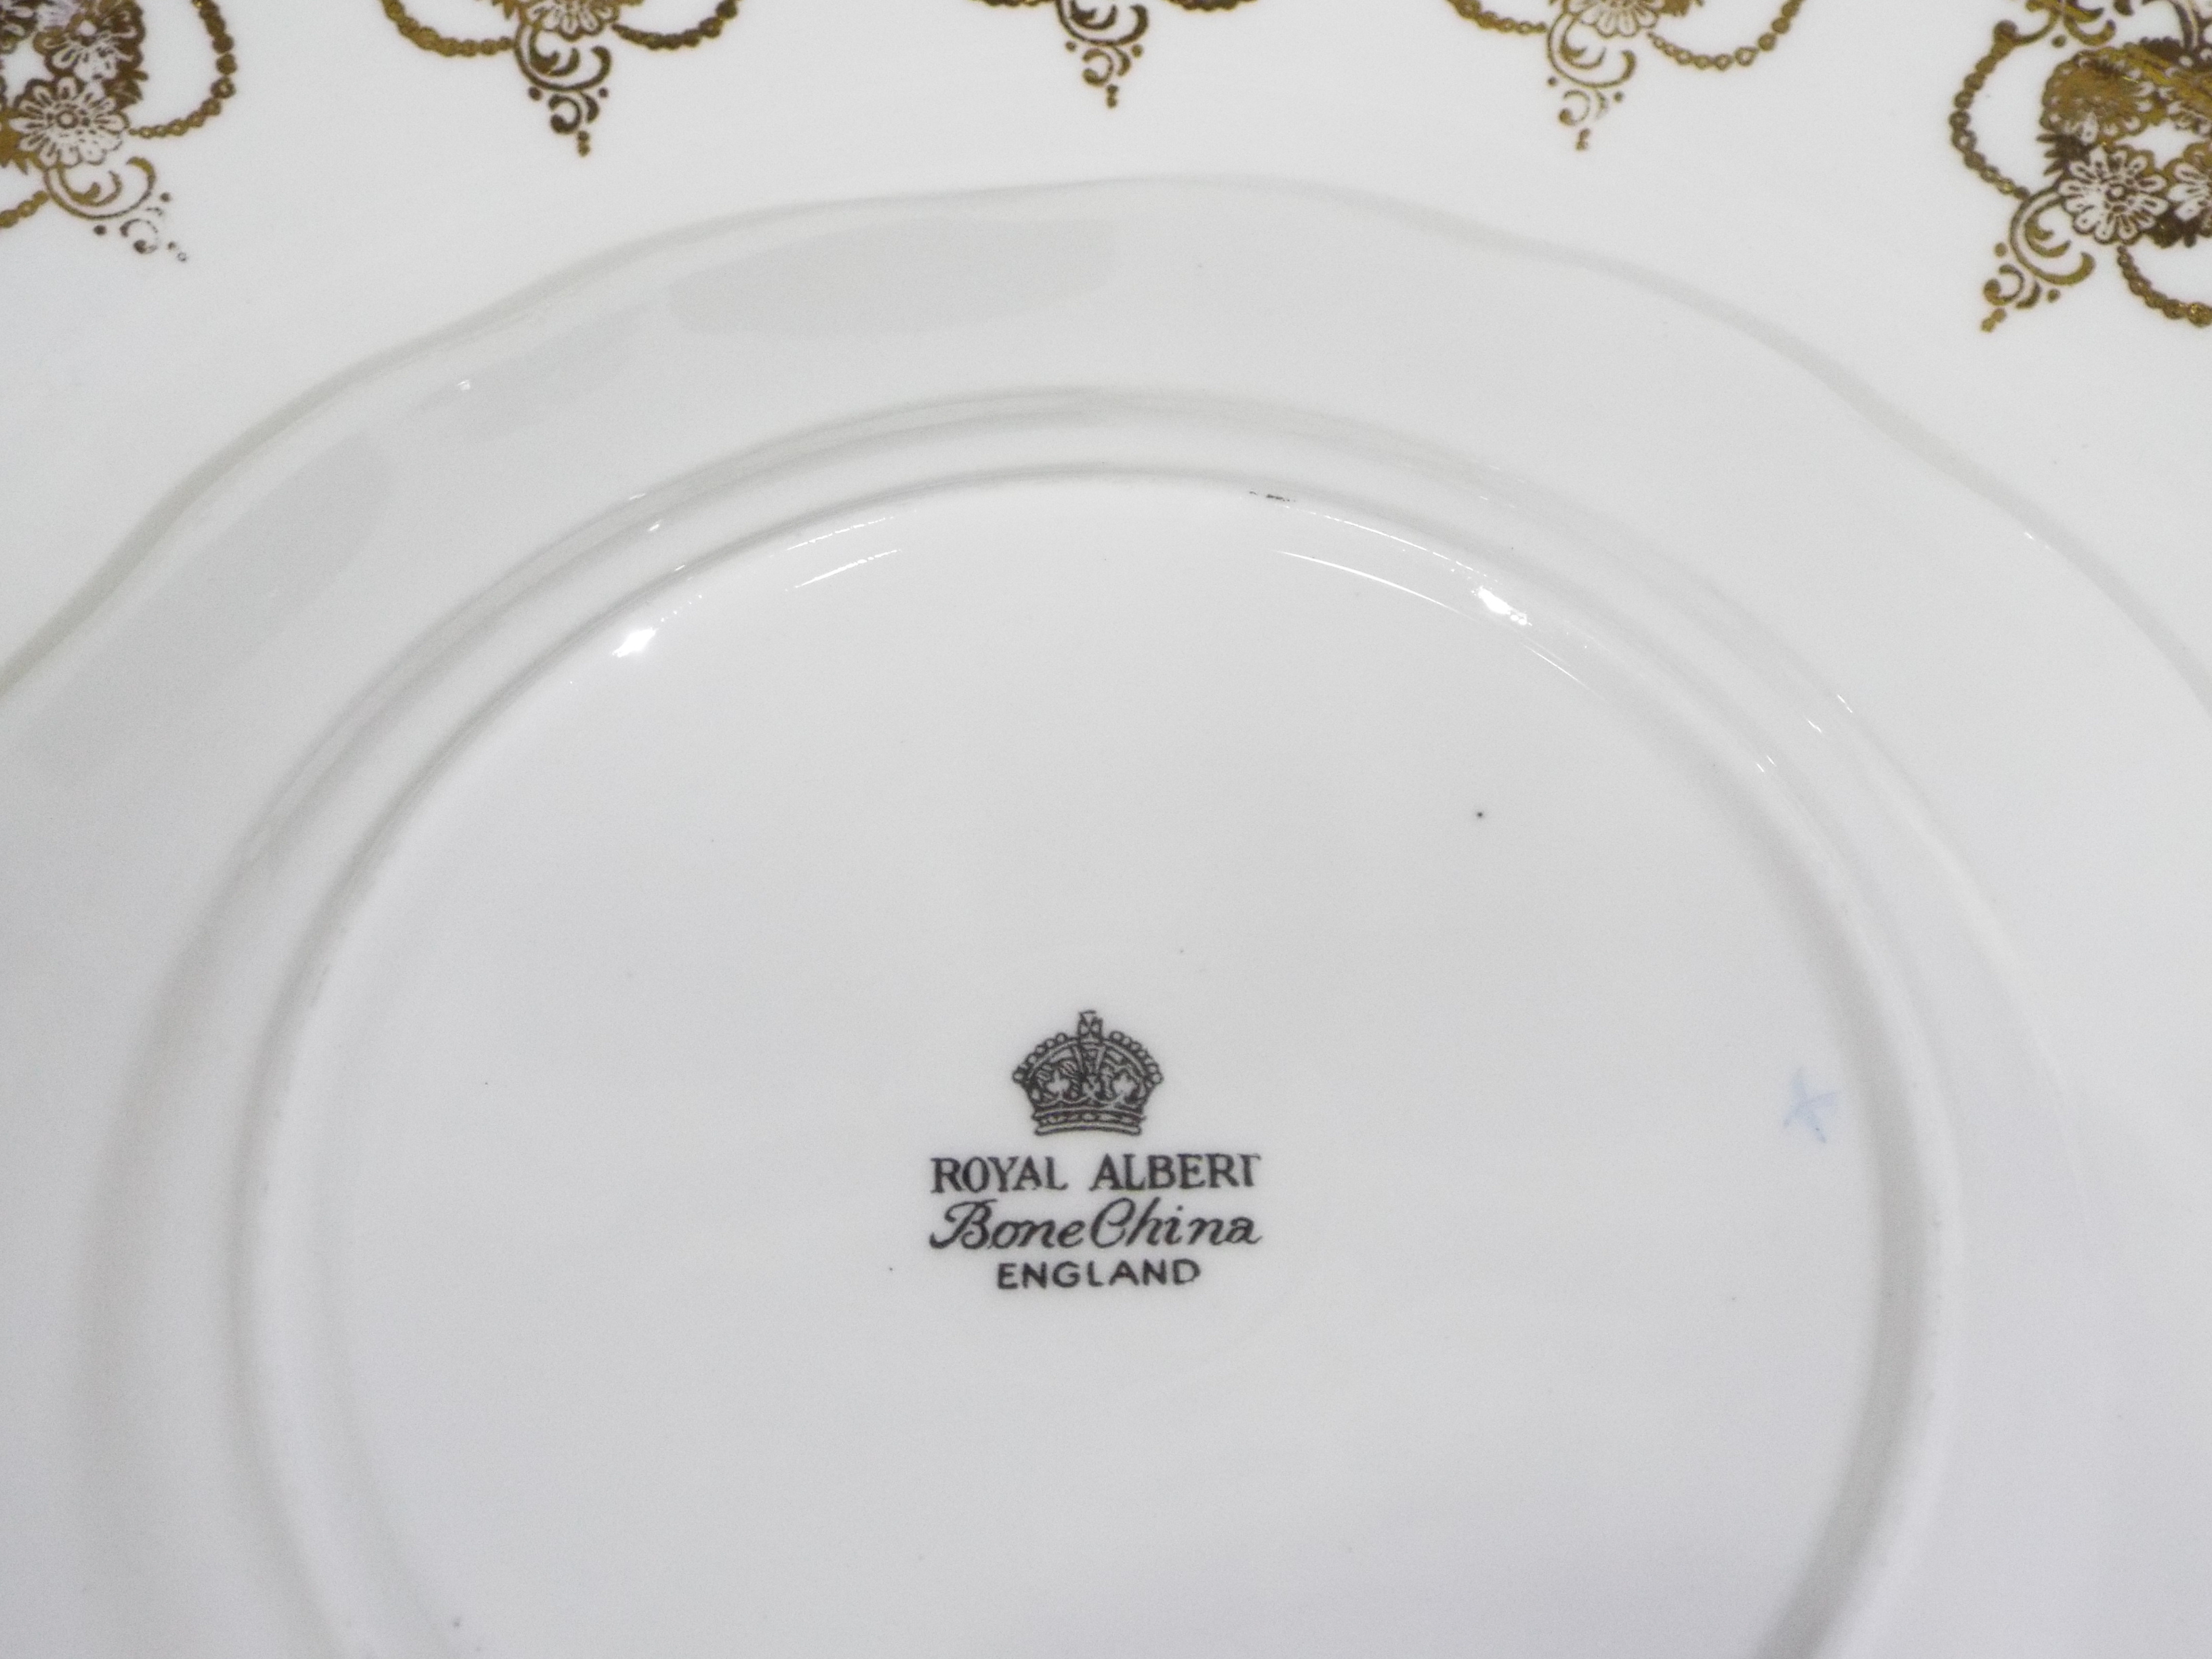 Royal Albert - A collection of tea wares with decoration of gilt floral swags comprising six trios, - Image 7 of 7